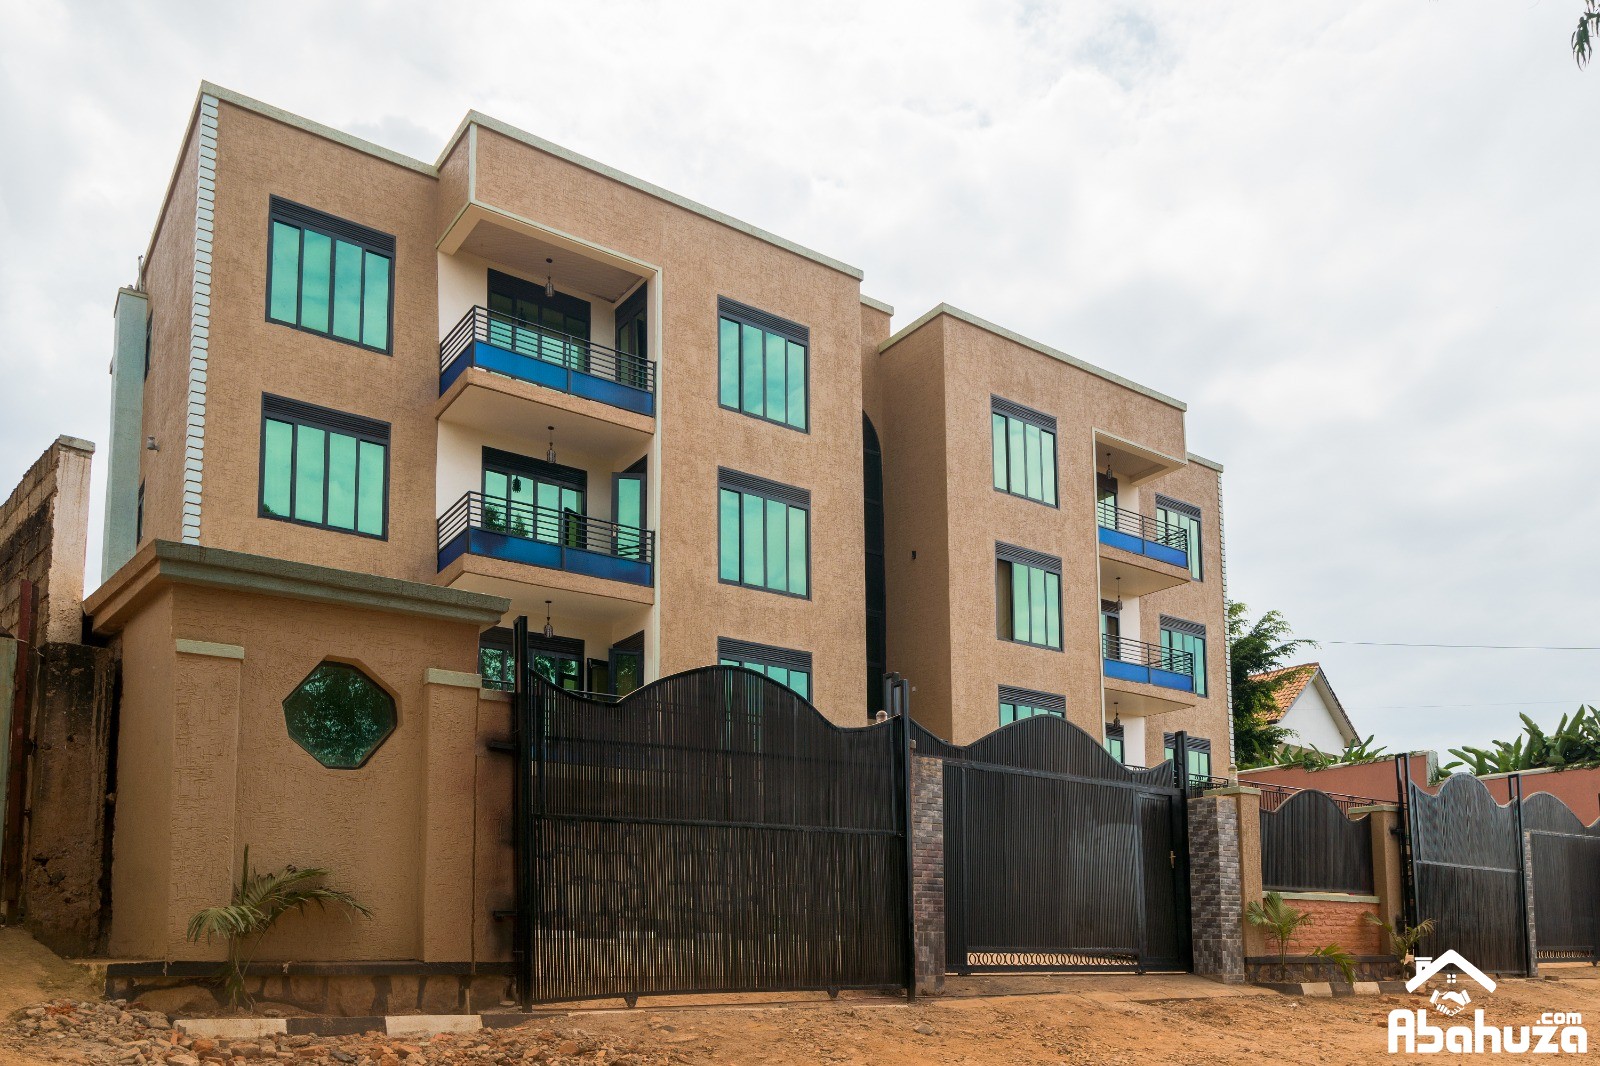 A FURNISHED 3 BEDROOM APARTMENT FOR RENT IN KIGALI AT GISOZI